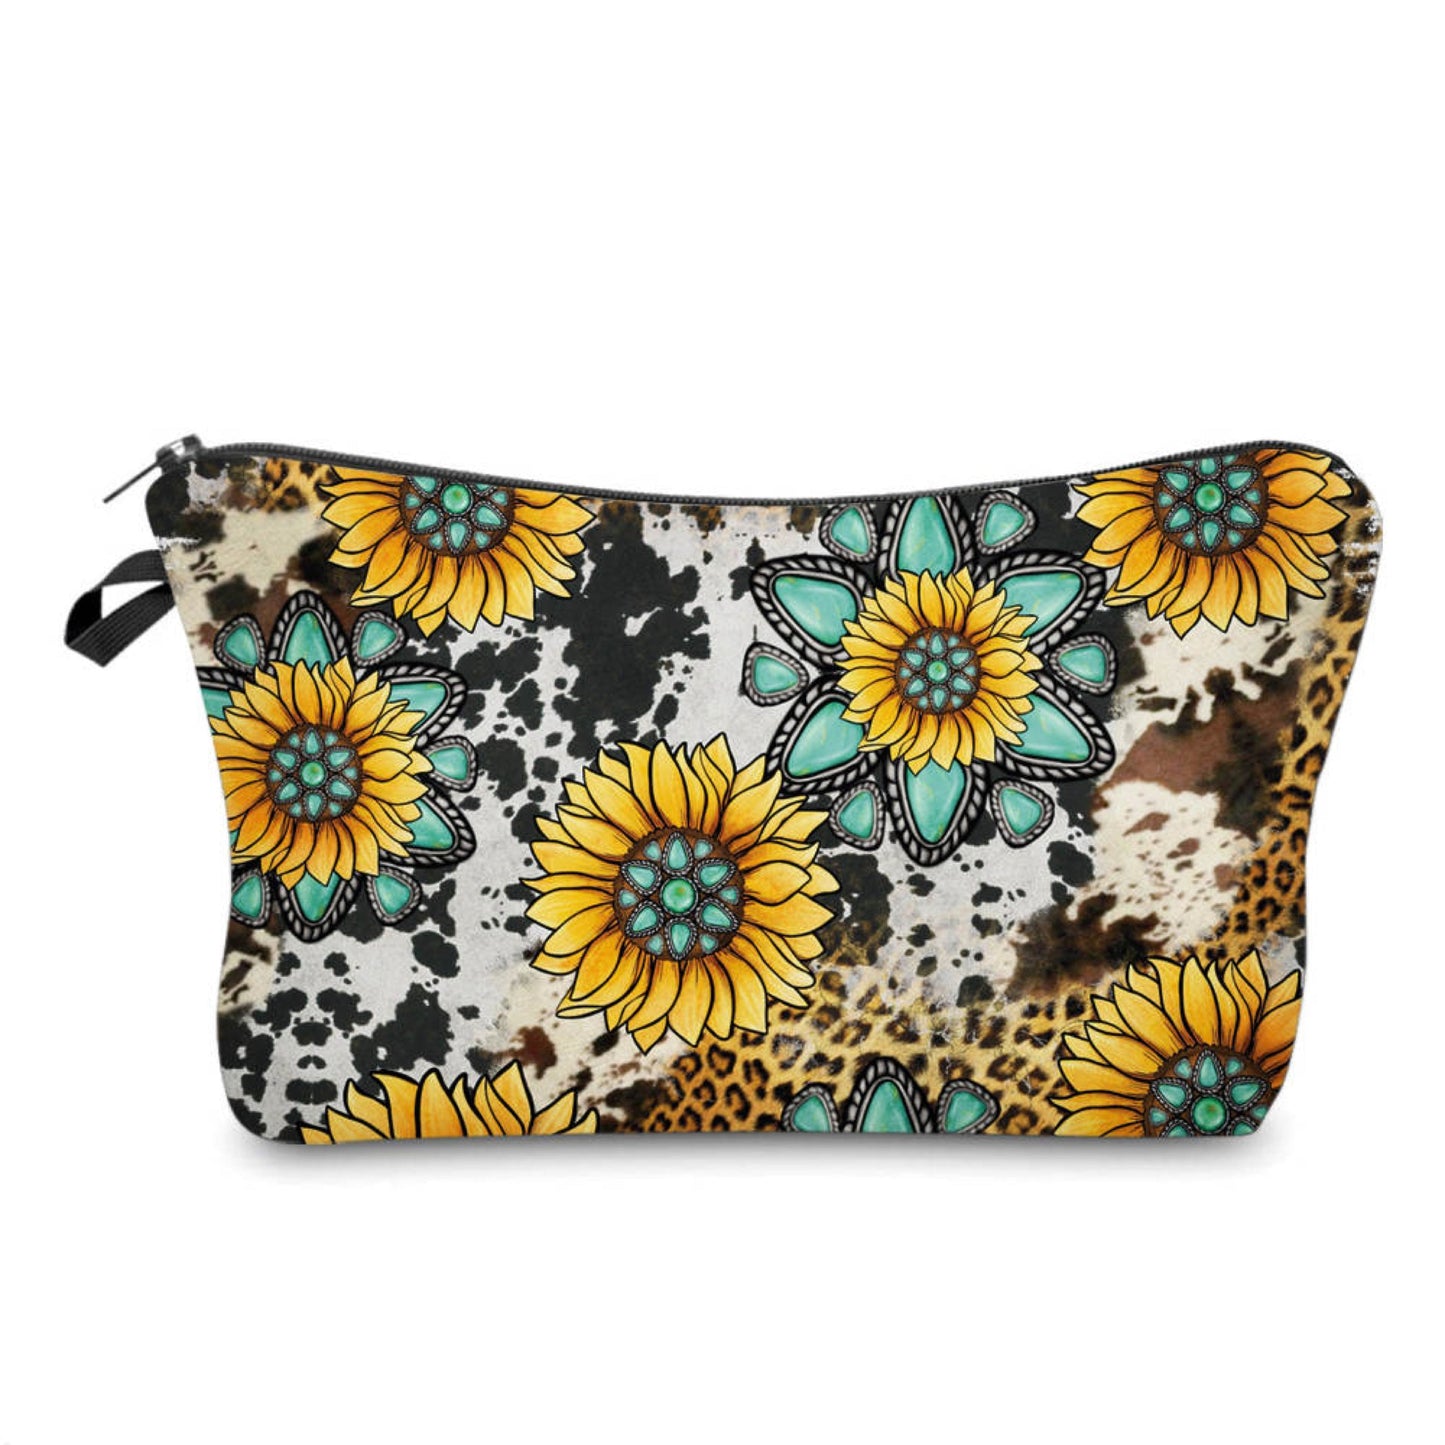 Pouch - Sunflower, Turquoise Sunflower